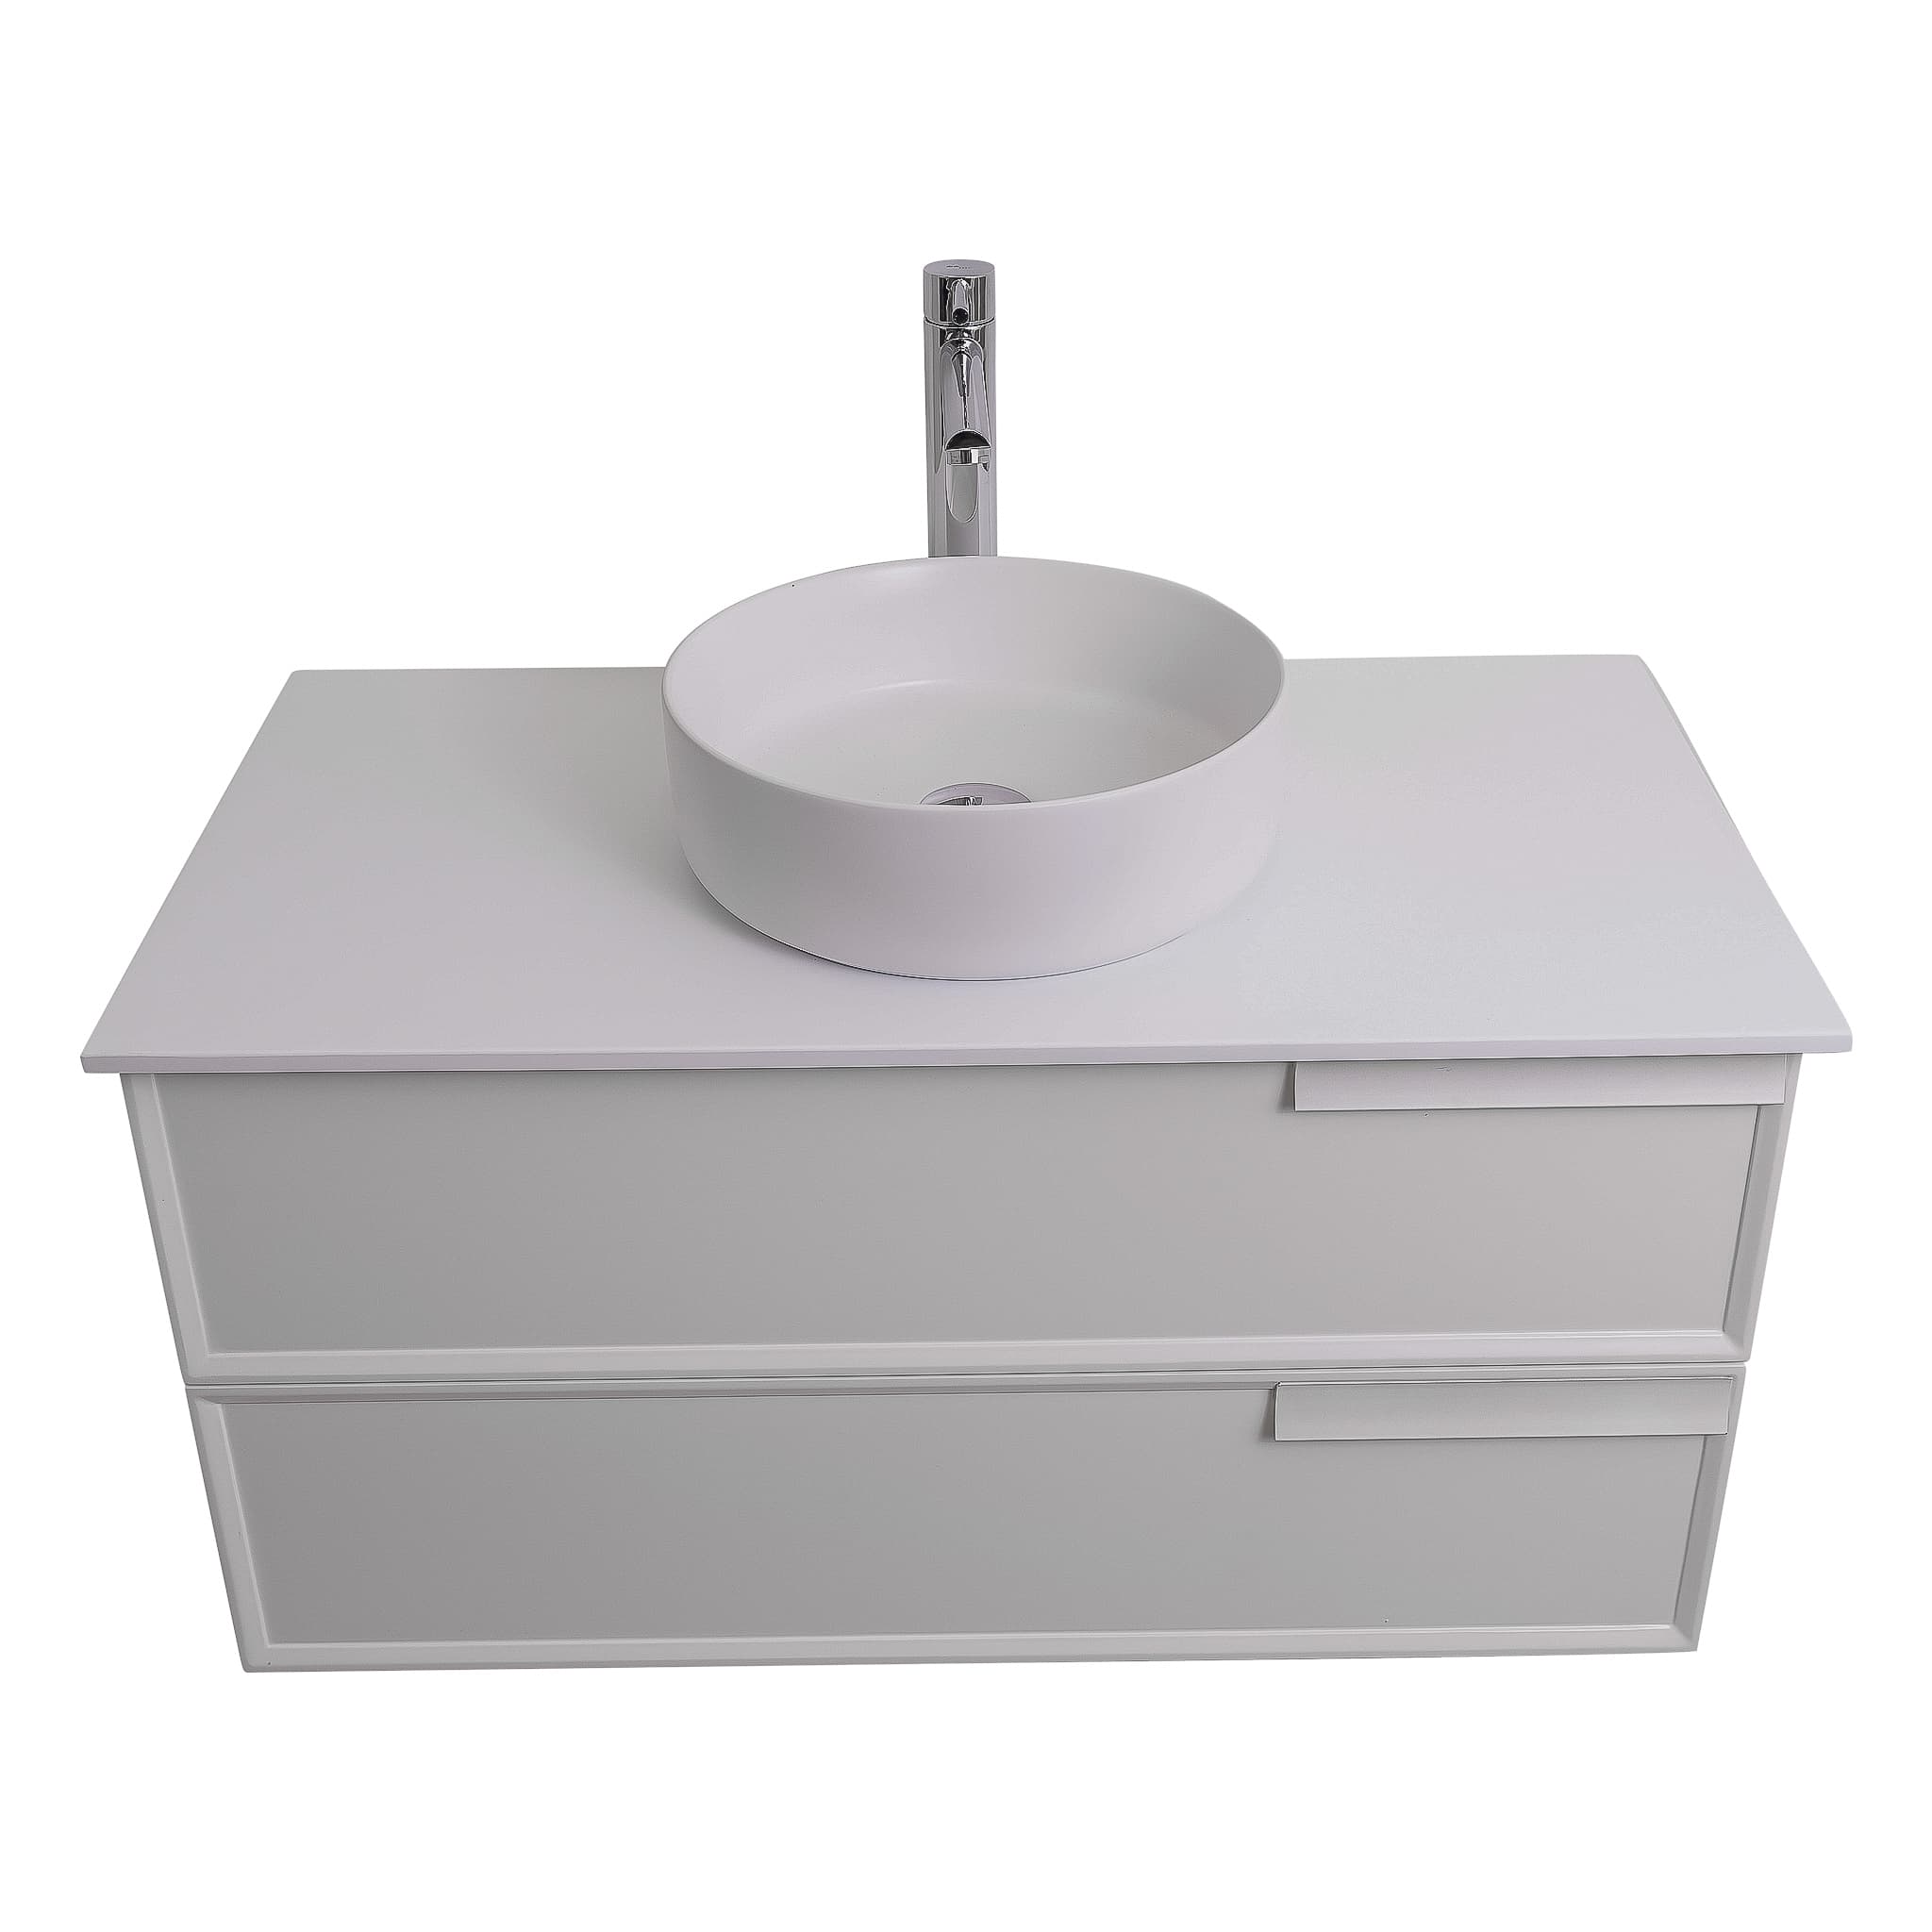 Garda 39.5 Matte White Cabinet, Ares White Top and Ares White Ceramic Basin, Wall Mounted Modern Vanity Set